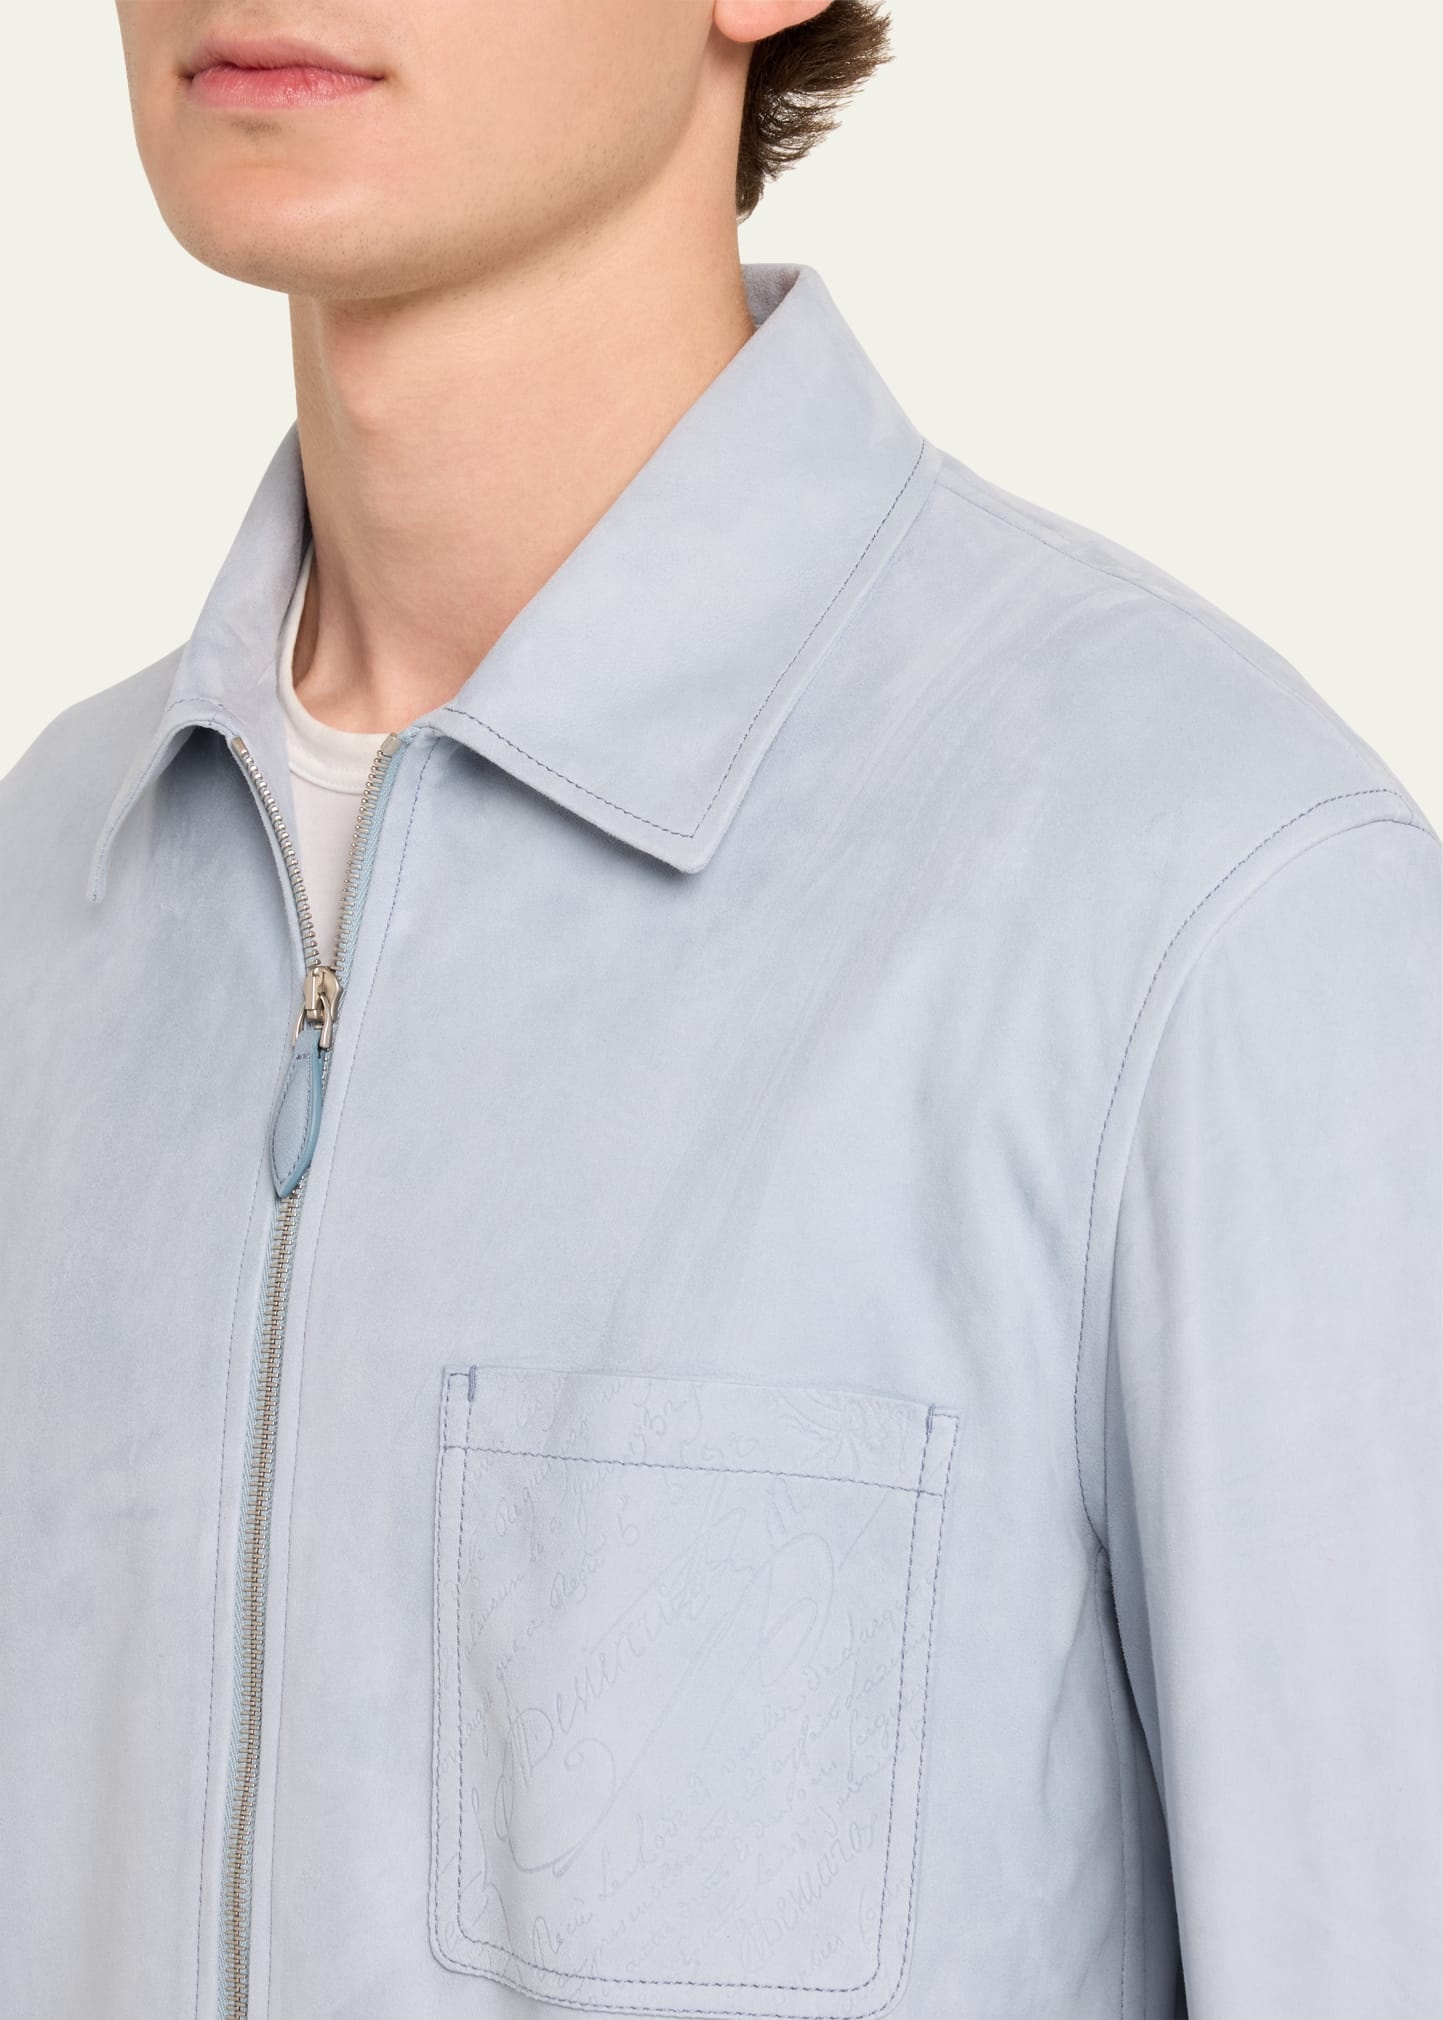 Men's Suede Overshirt with Scritto Pocket - 5